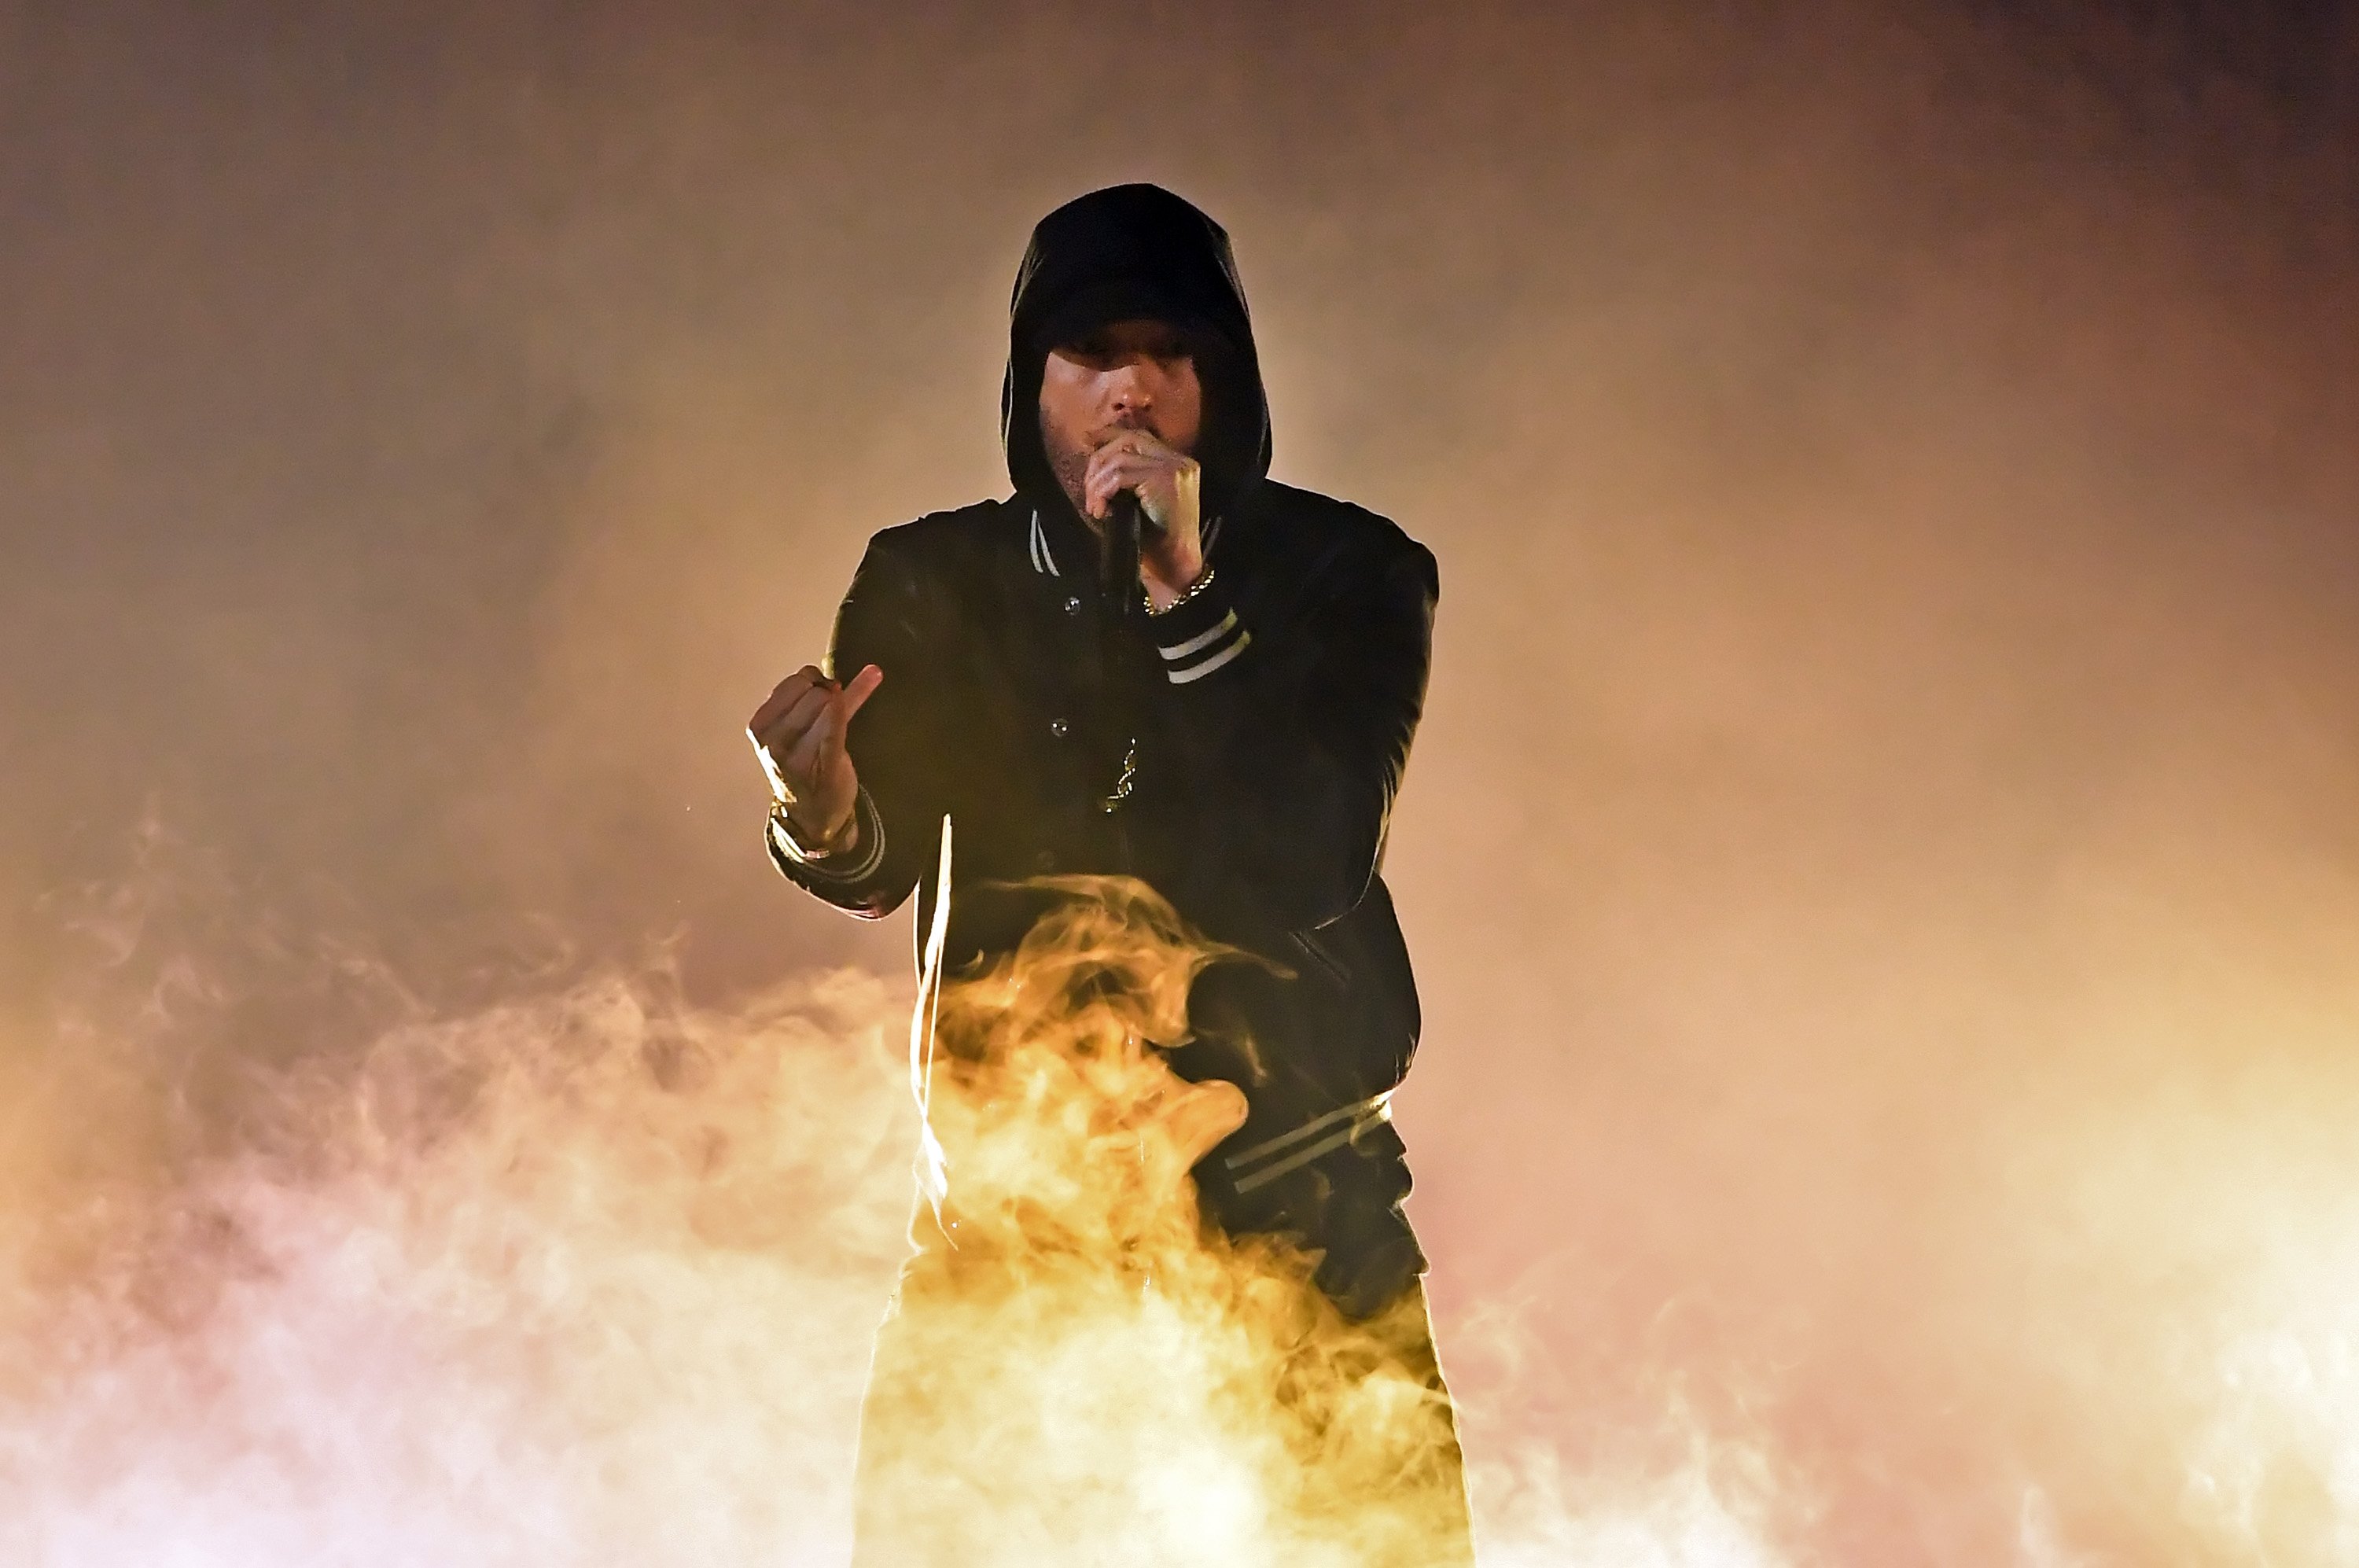 Eminem surrounded by smoke on stage